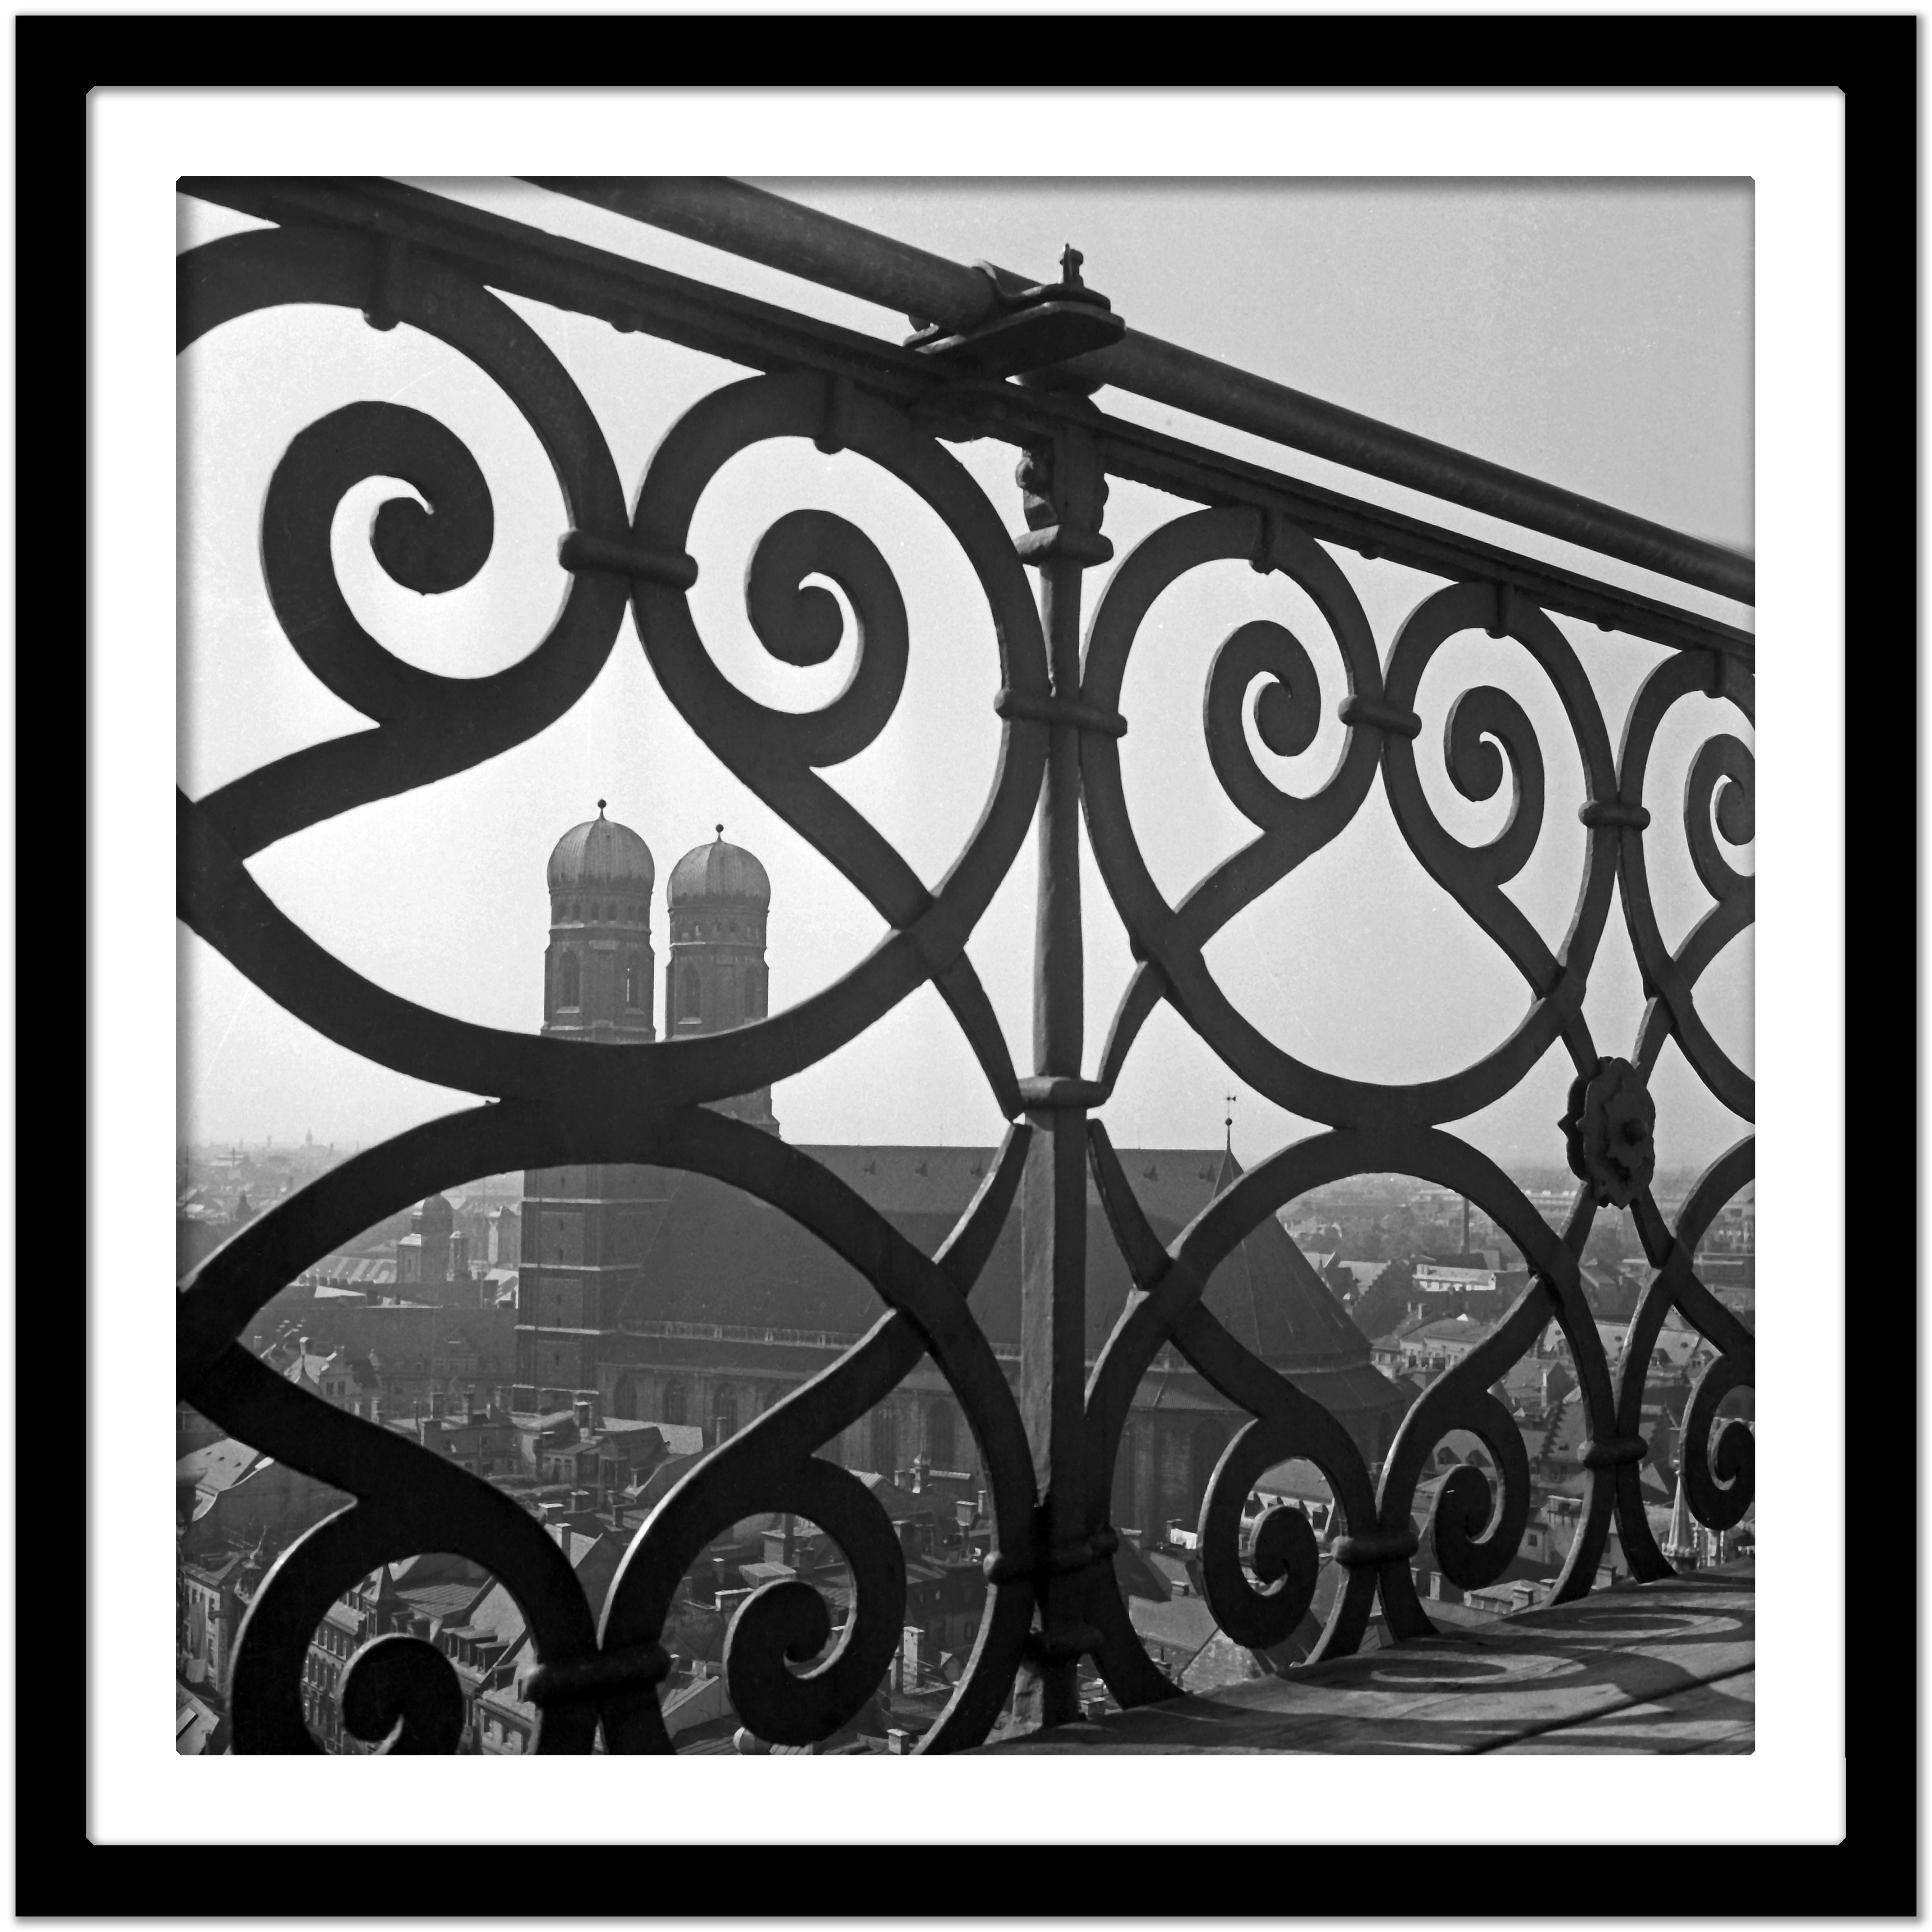 View to Munich Frauenkirche church with railing, Germany 1938, Printed Later - Modern Photograph by Karl Heinrich Lämmel